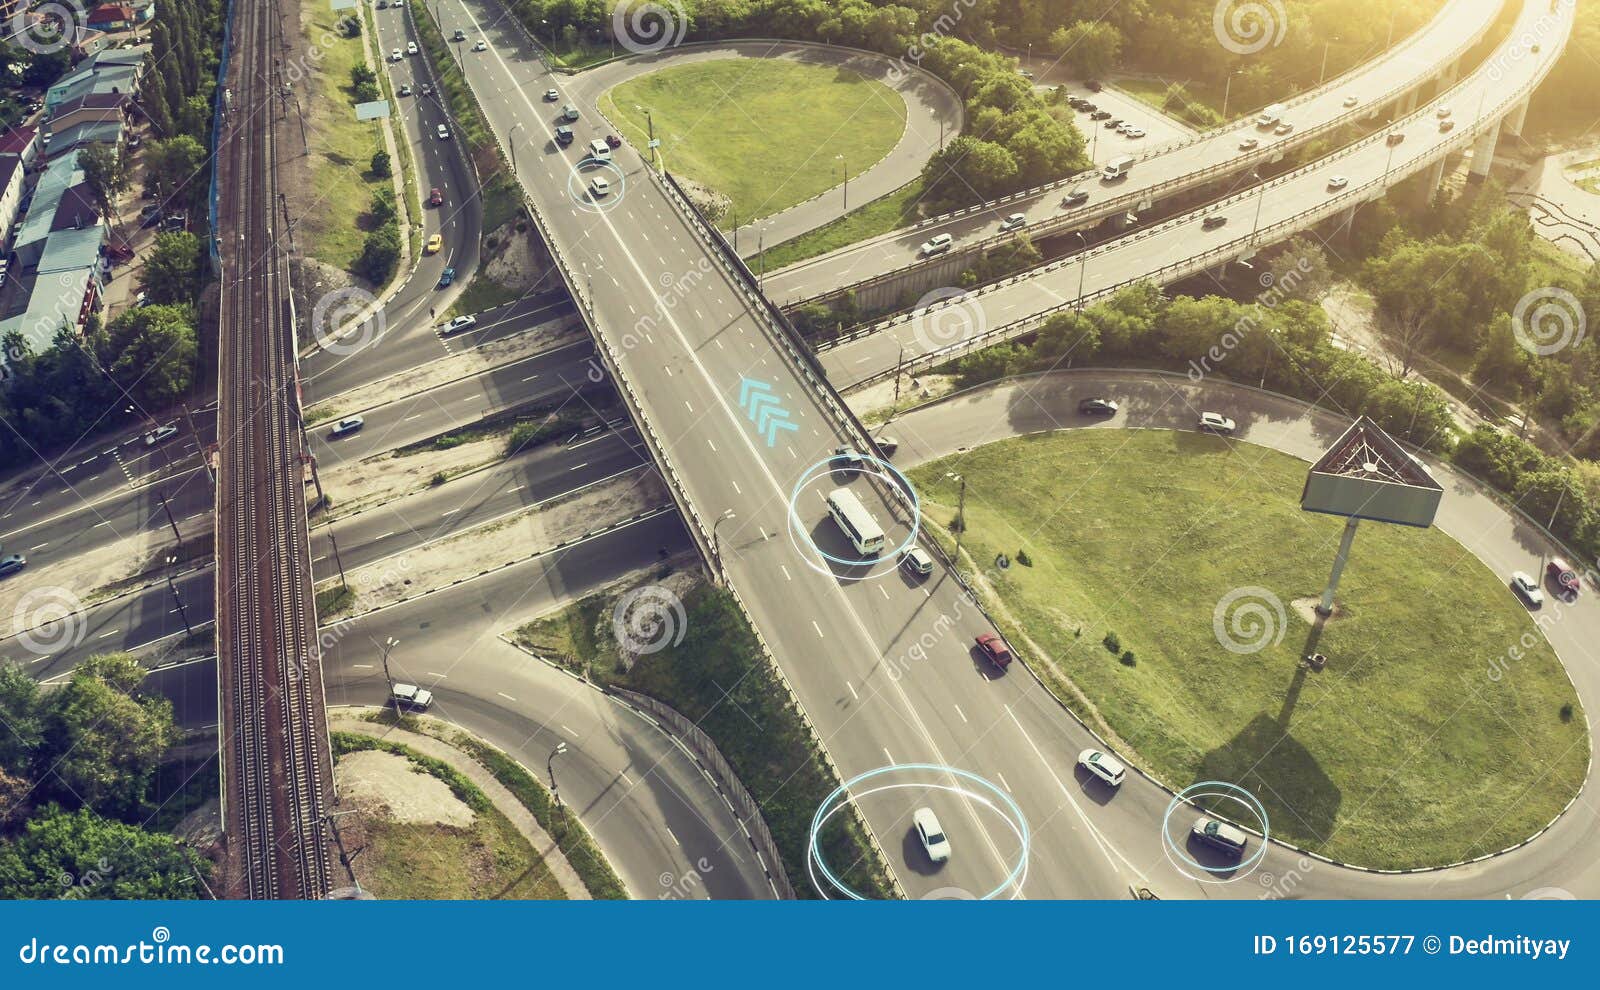 autonomous self driving cars concept. aerial view of cars and buses moving on city intersection and artificial